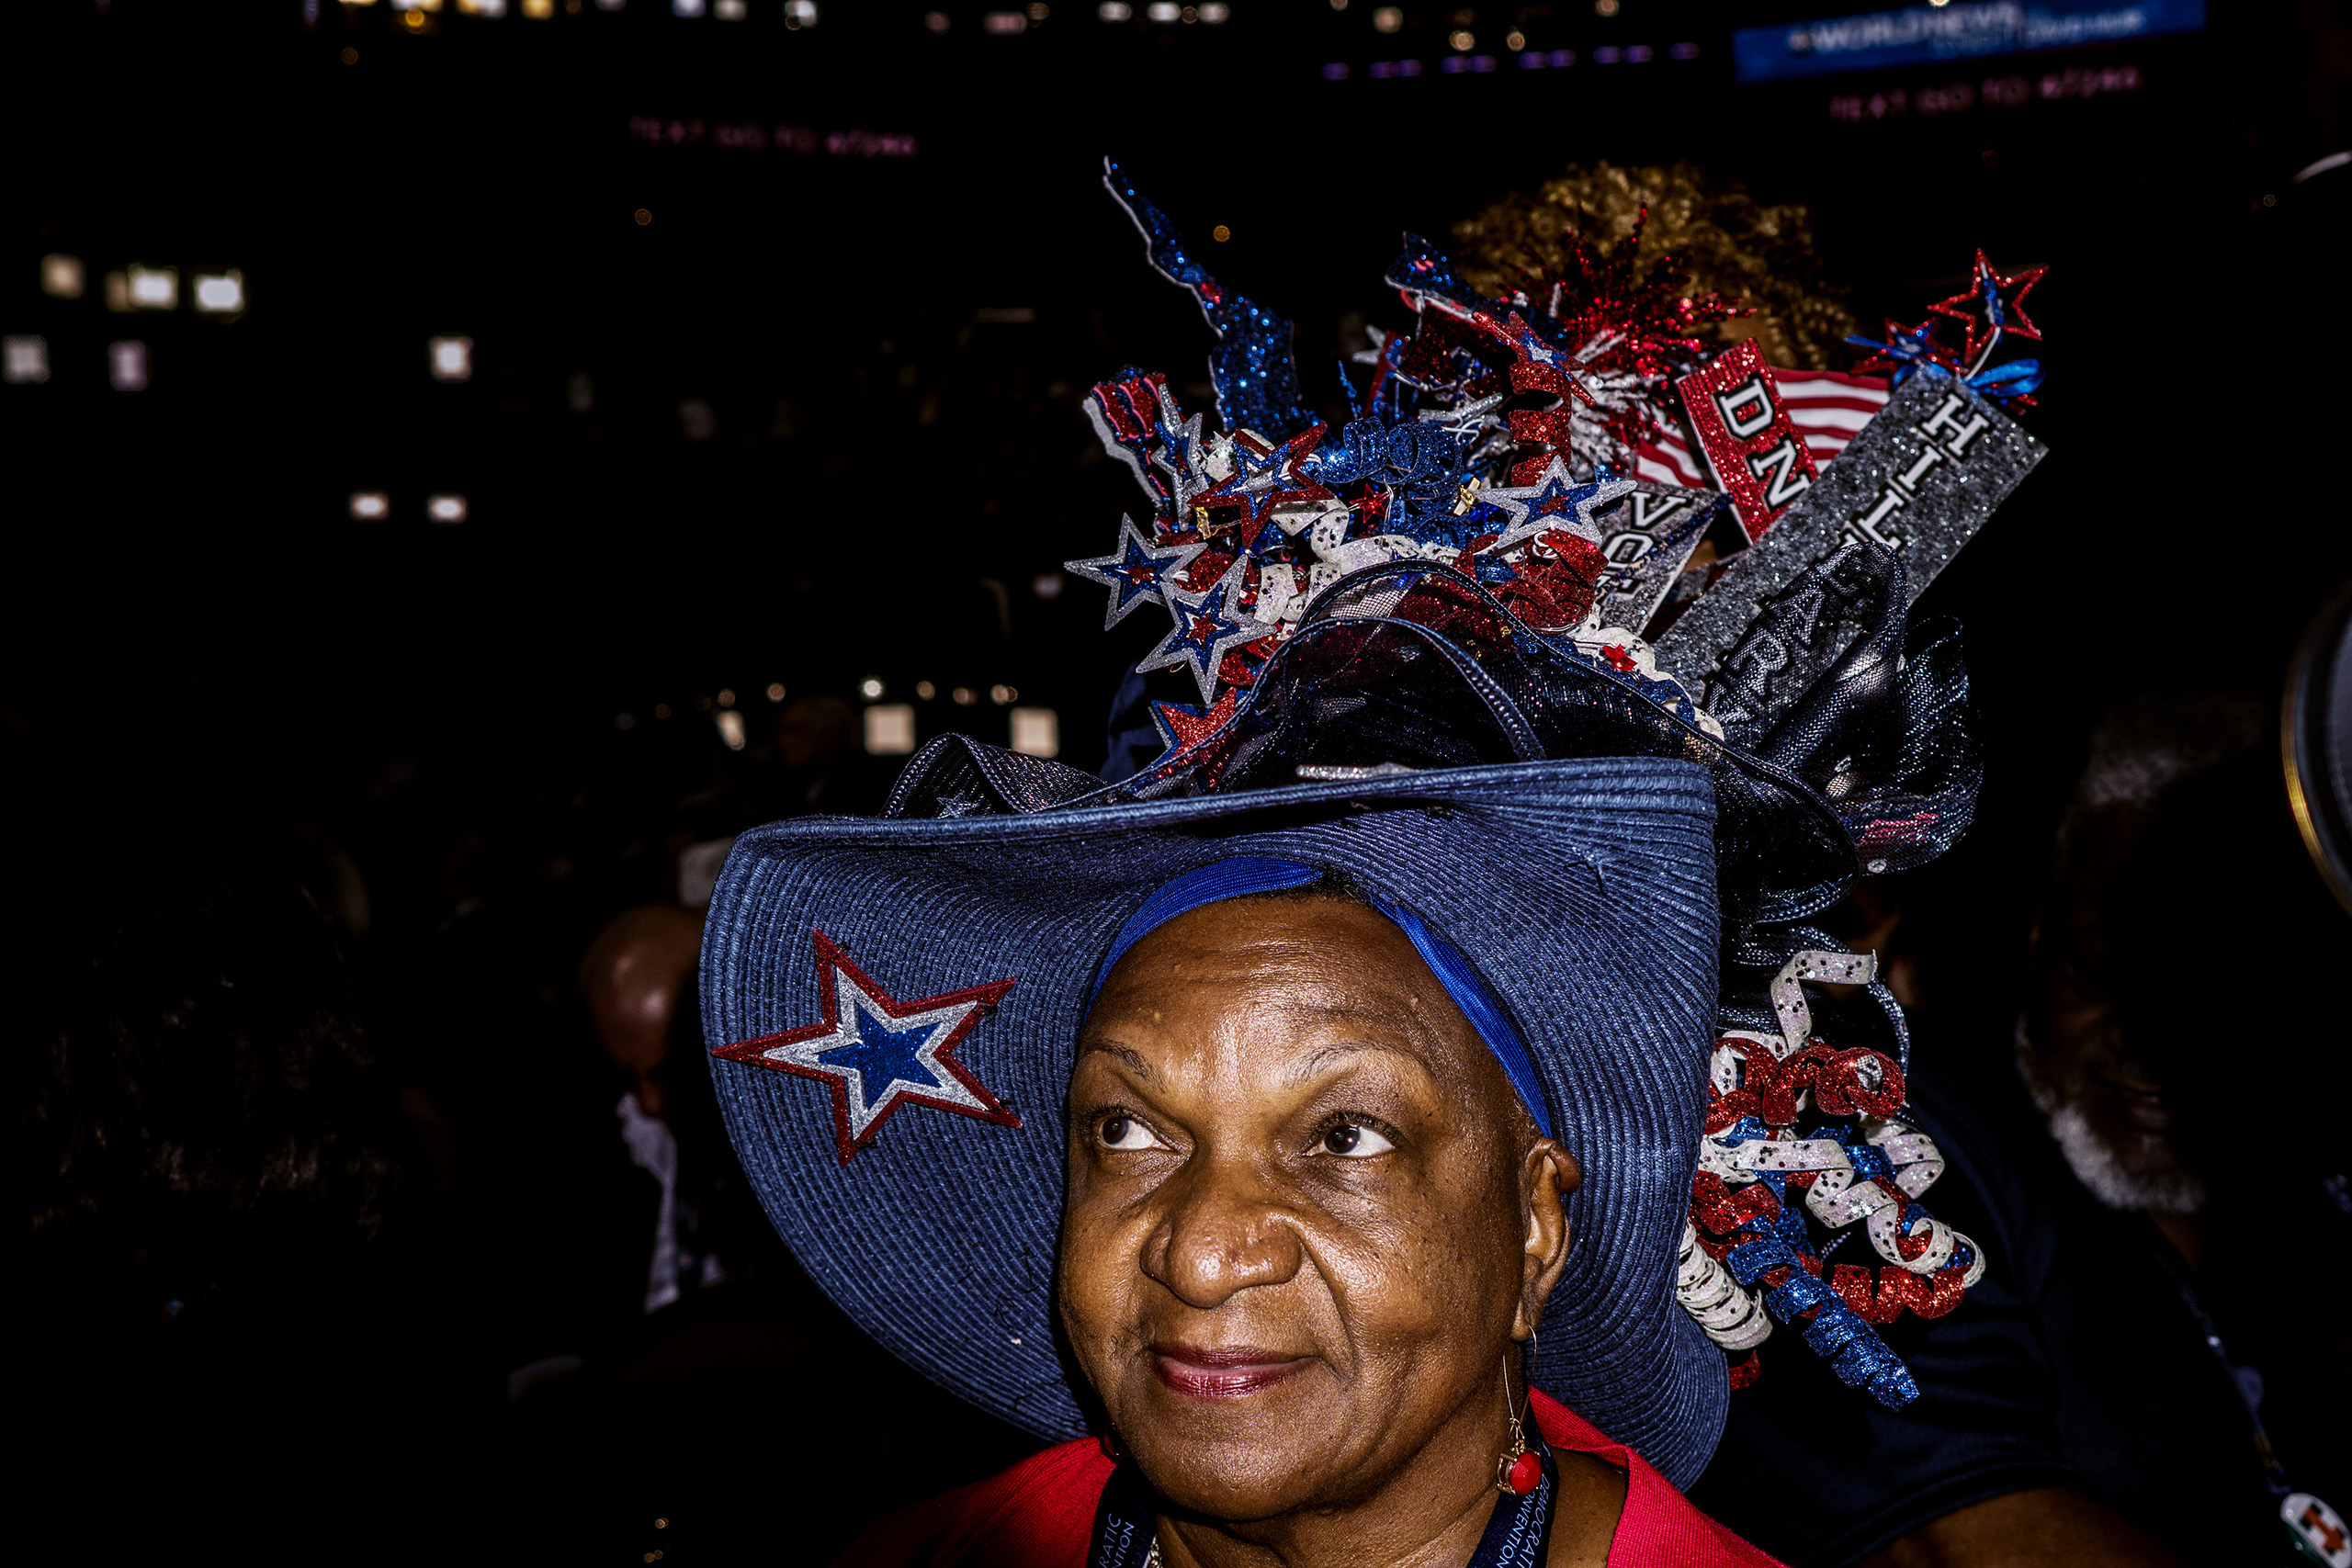 Florida delegate Lavon Bracy on the first day of the Democratic National Convention at the Wells Fargo Center, July 25, 2016 in Philadelphia, Pennsylvania.